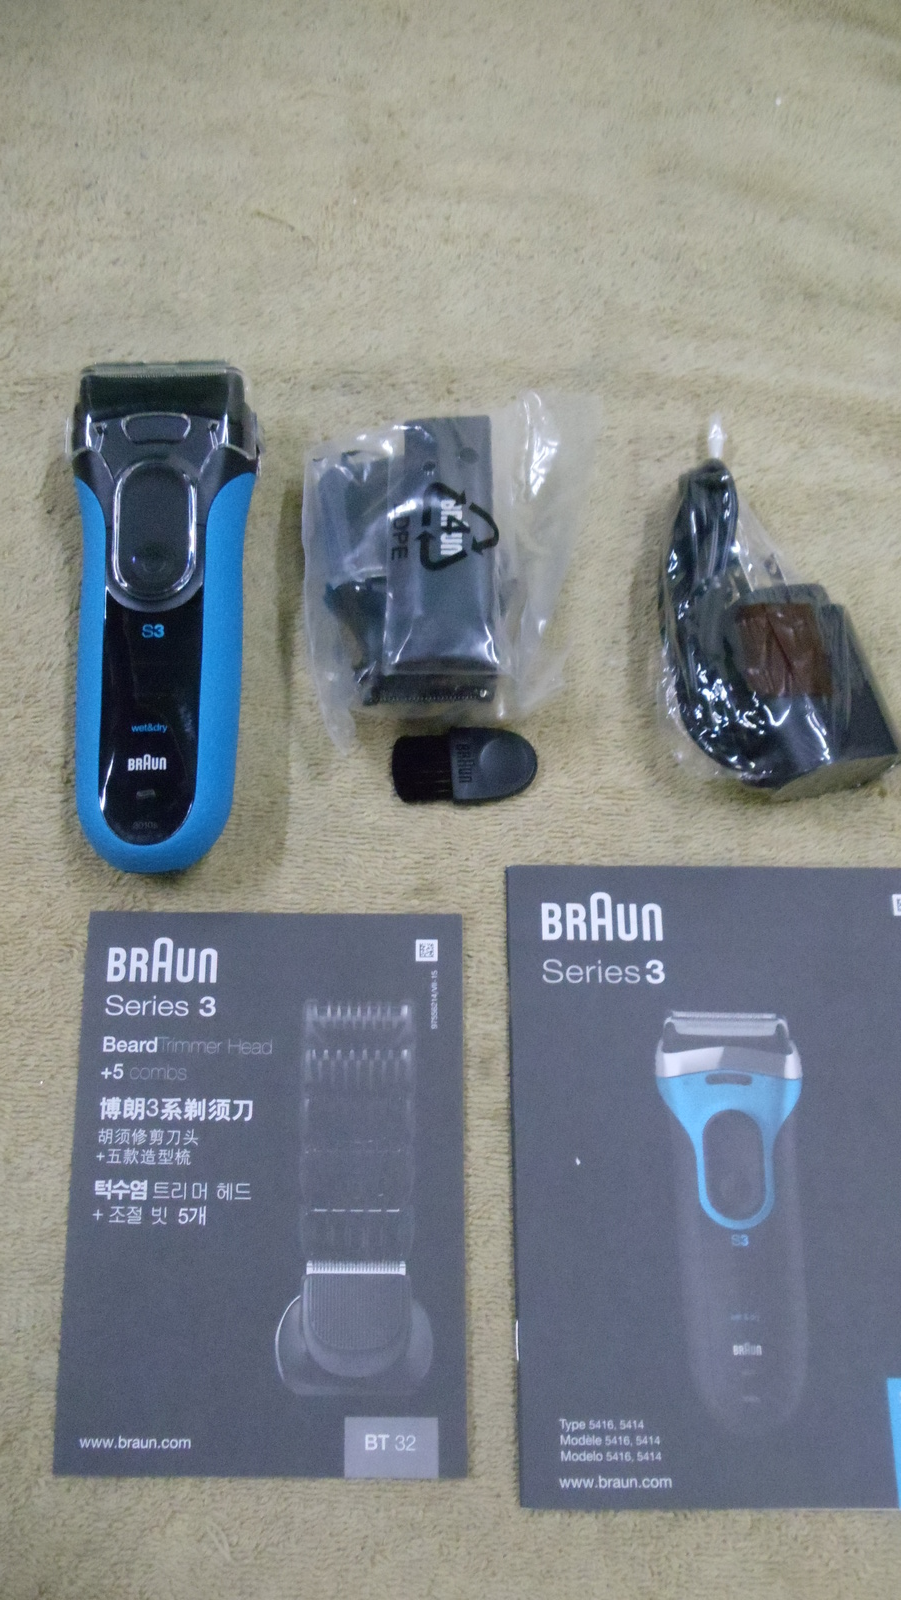 Braun S3 Shave And Style 3 In 1 Wet And Dry Rechargeable Electric Shaver